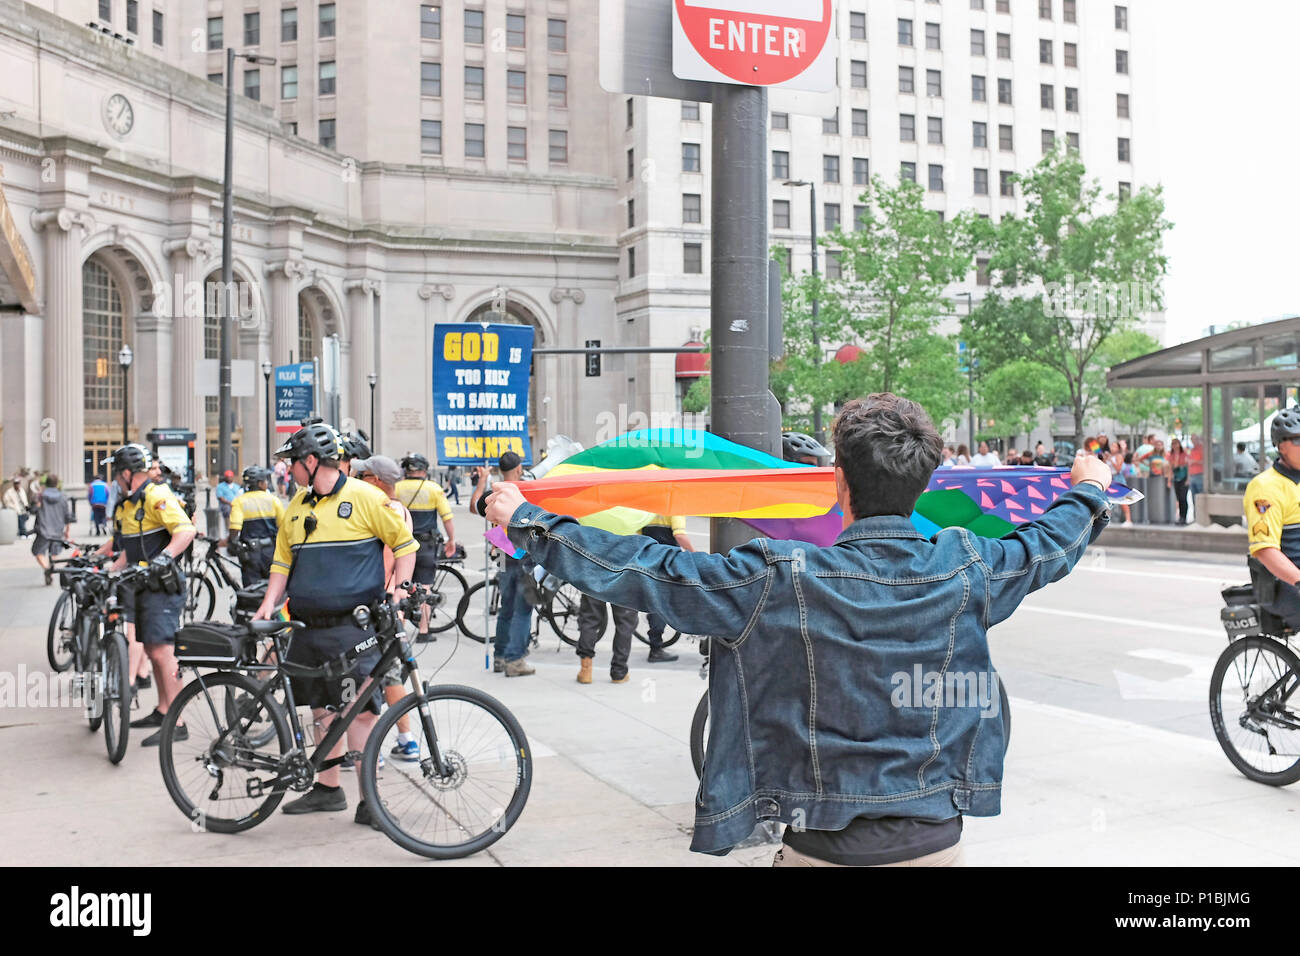 Man waves a rainbow flag in response to the police surrounded religious zealots protesting the Pride celebration in downtown Cleveland, Ohio, USA. Stock Photo